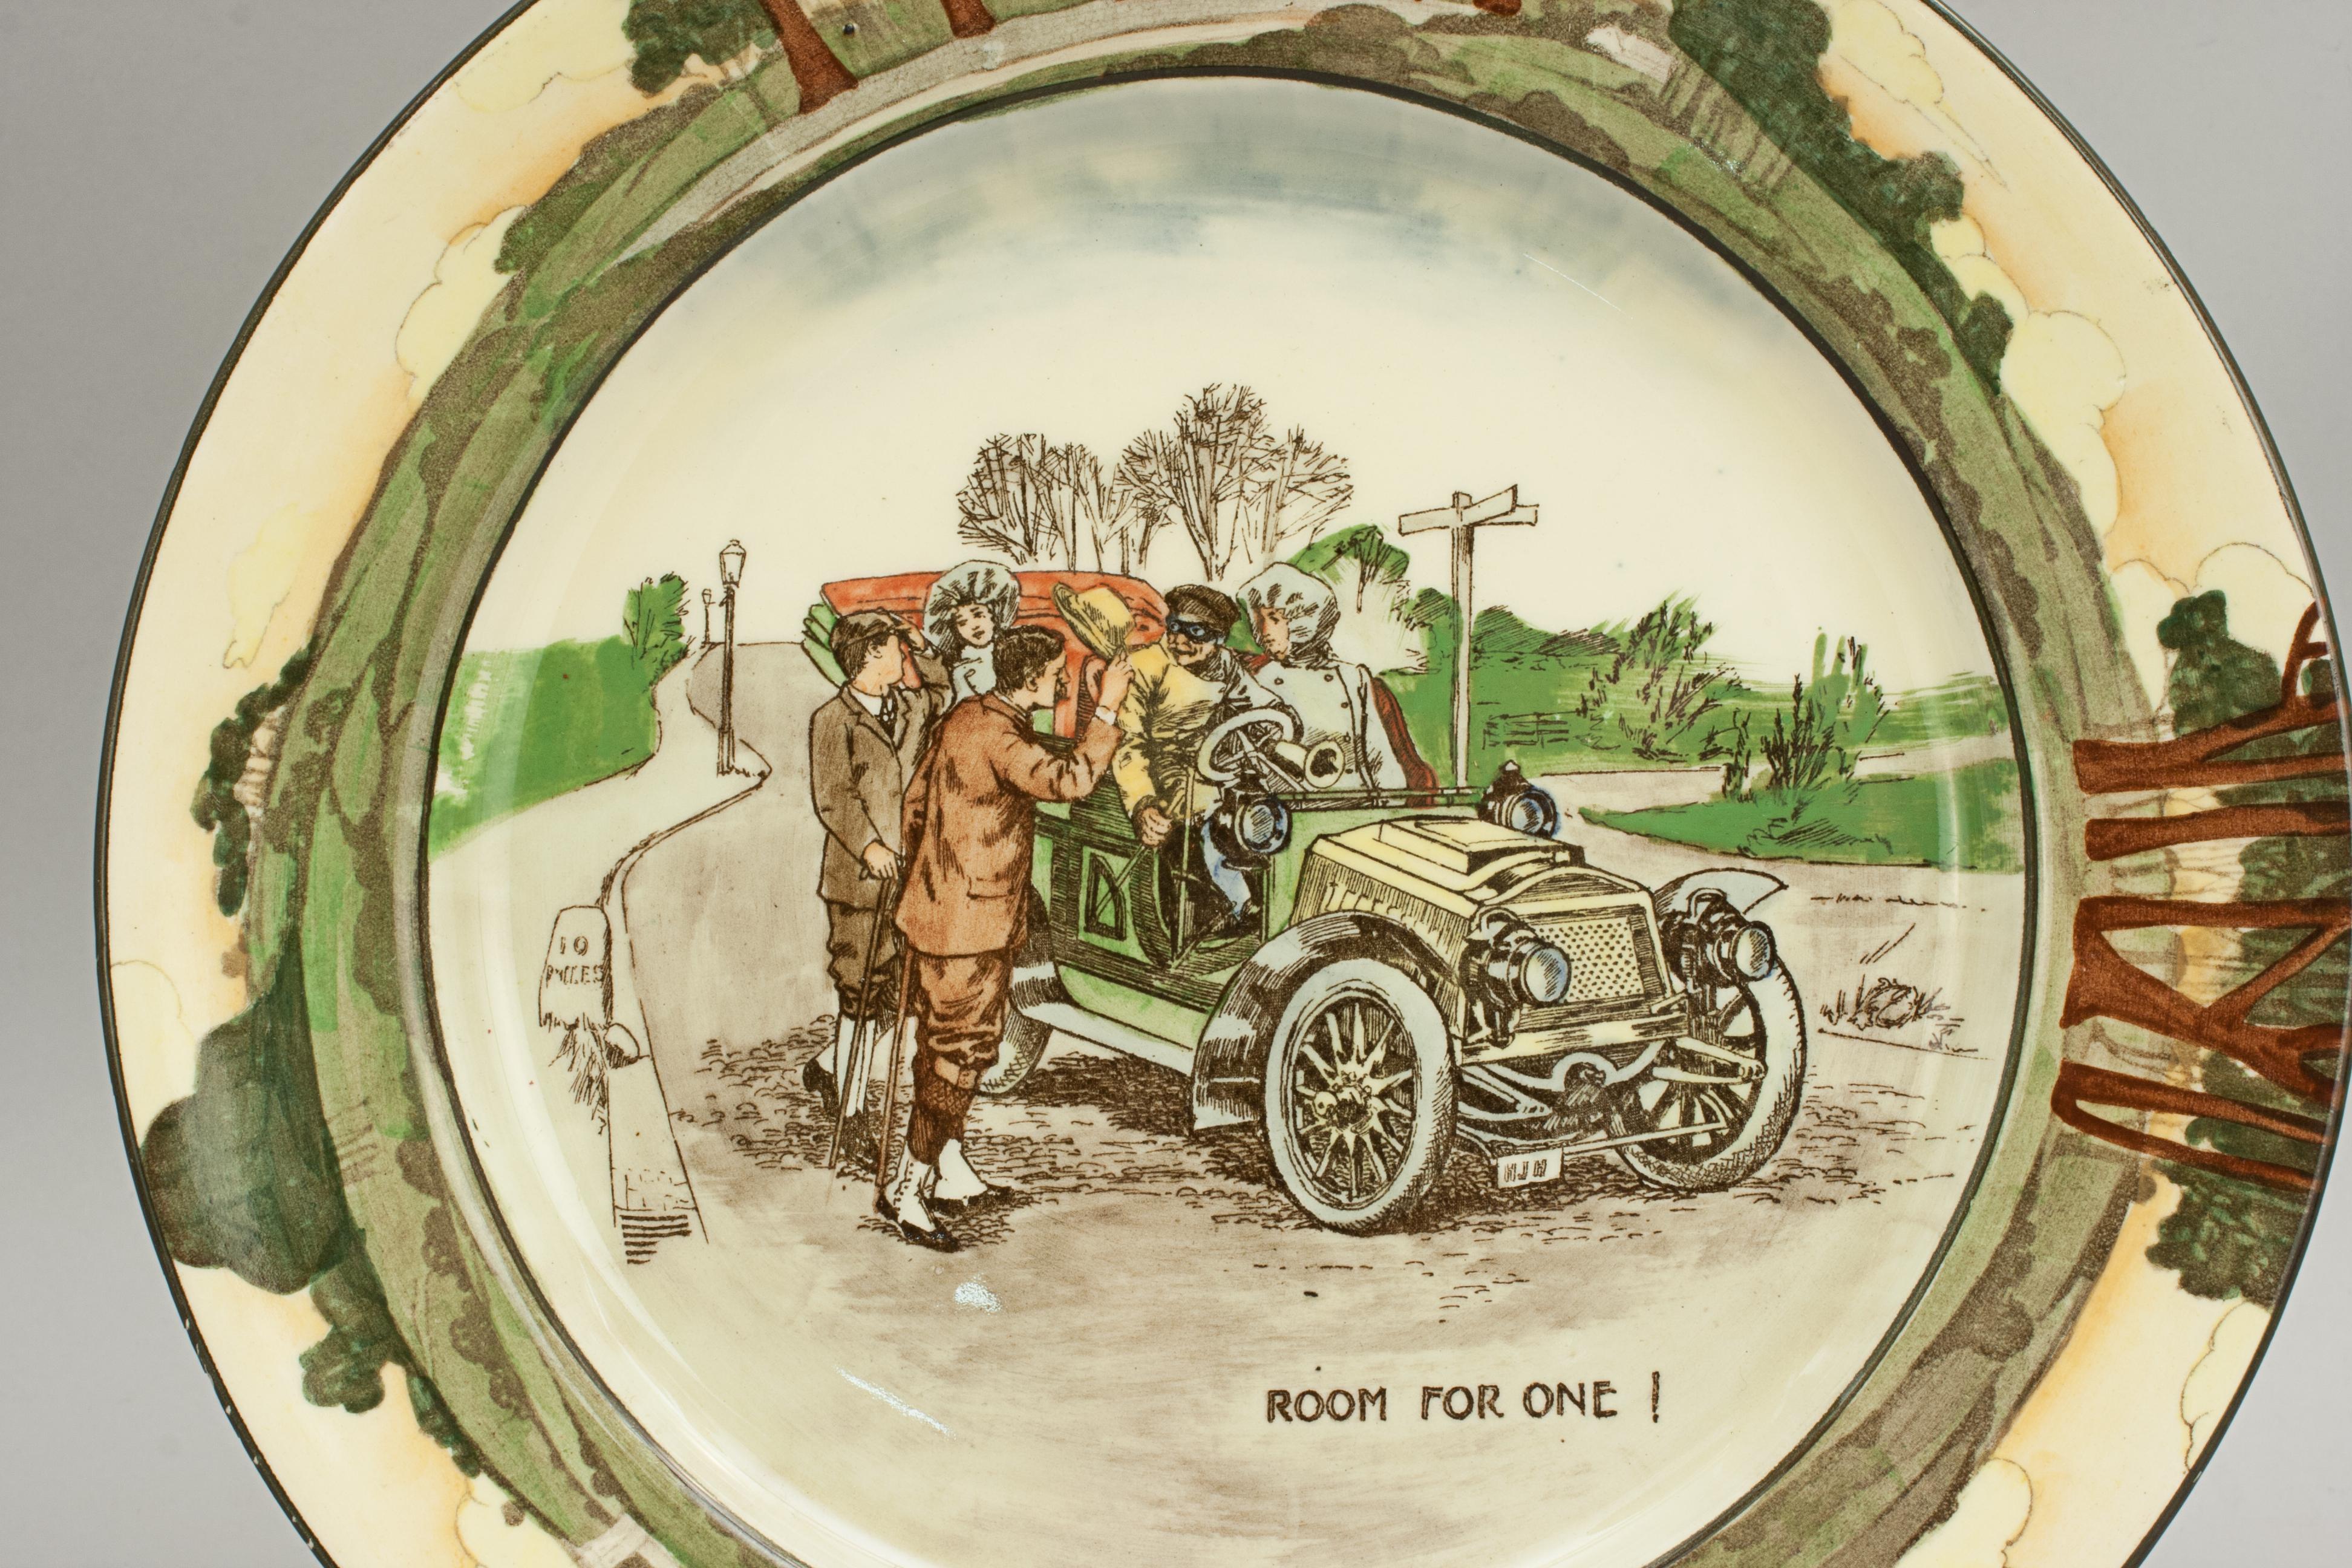 Rare Royal Doulton motoring plate.
An early Royal Doulton automobile plate entitled 'Room For One!'. The plate depicts two walkers flagging down a passing car with the caption 'Room For One!'. The plate has the printed Royal Doulton trademark,